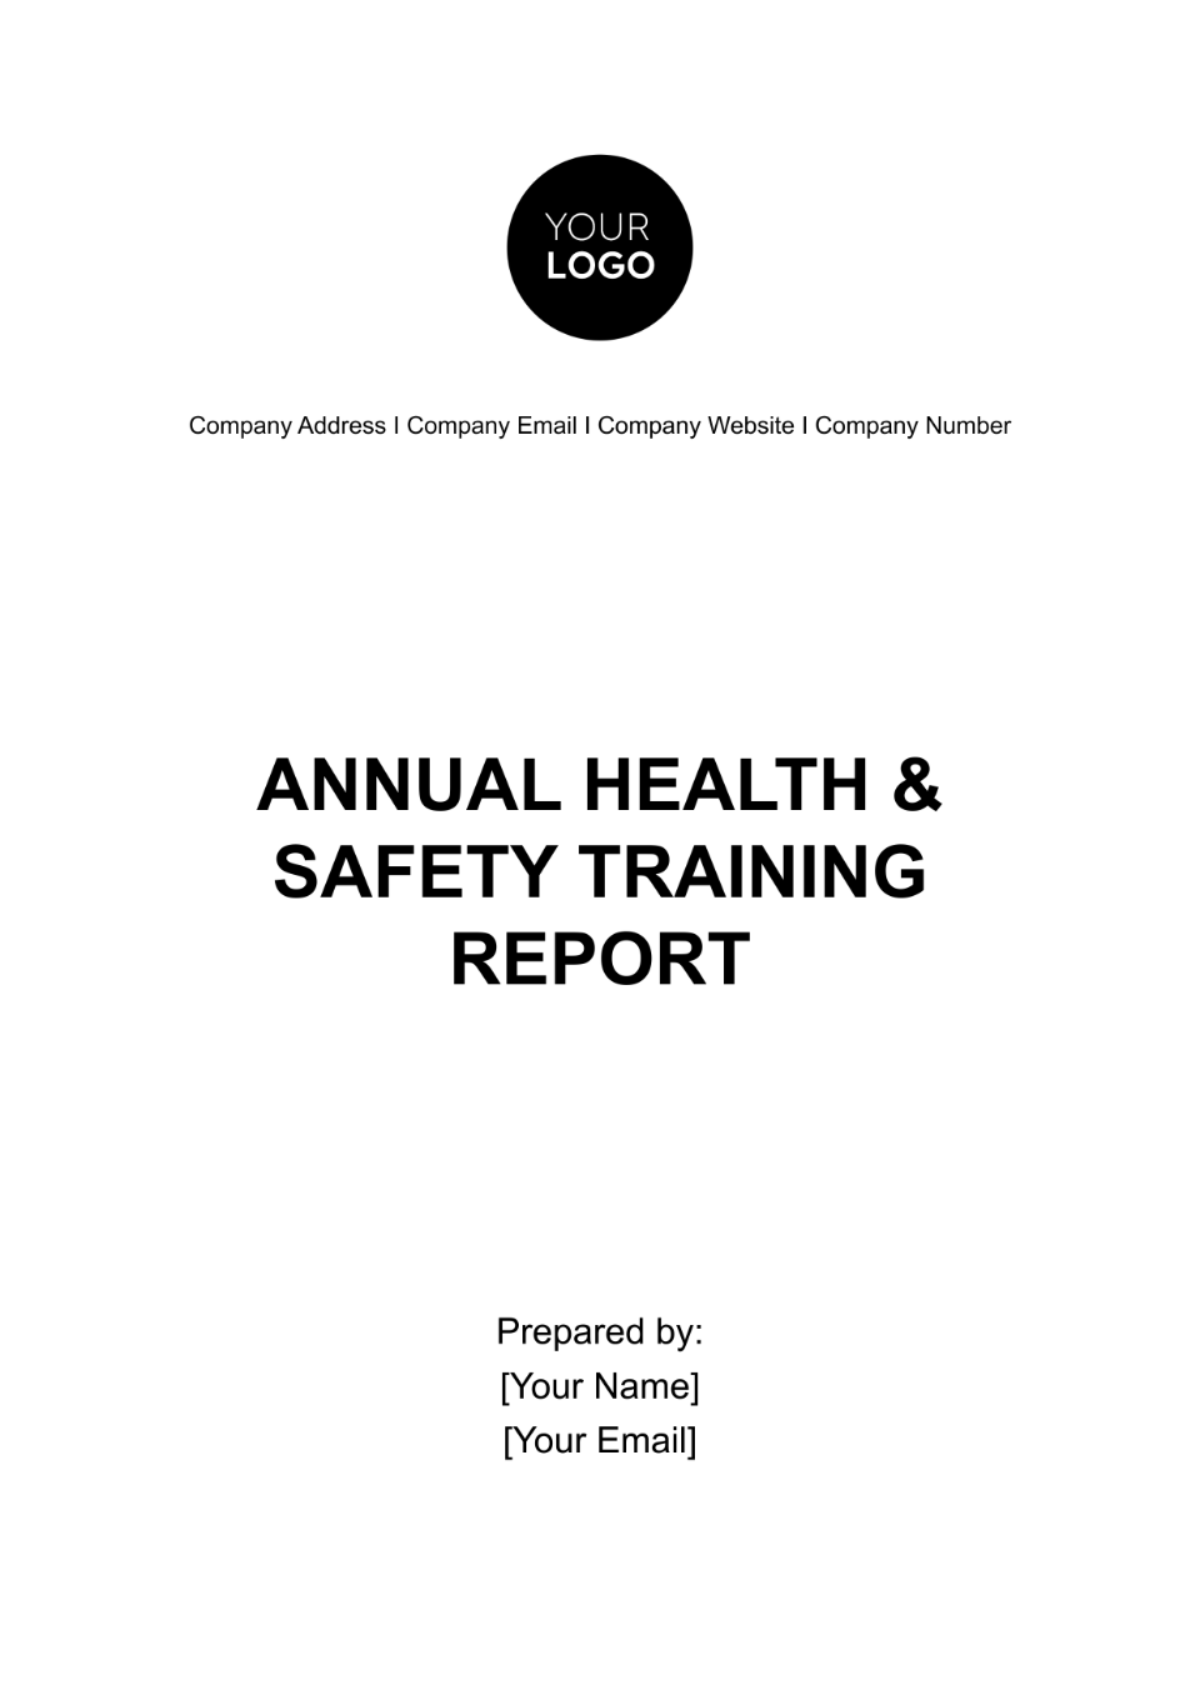 Free Annual Health & Safety Training Report Template